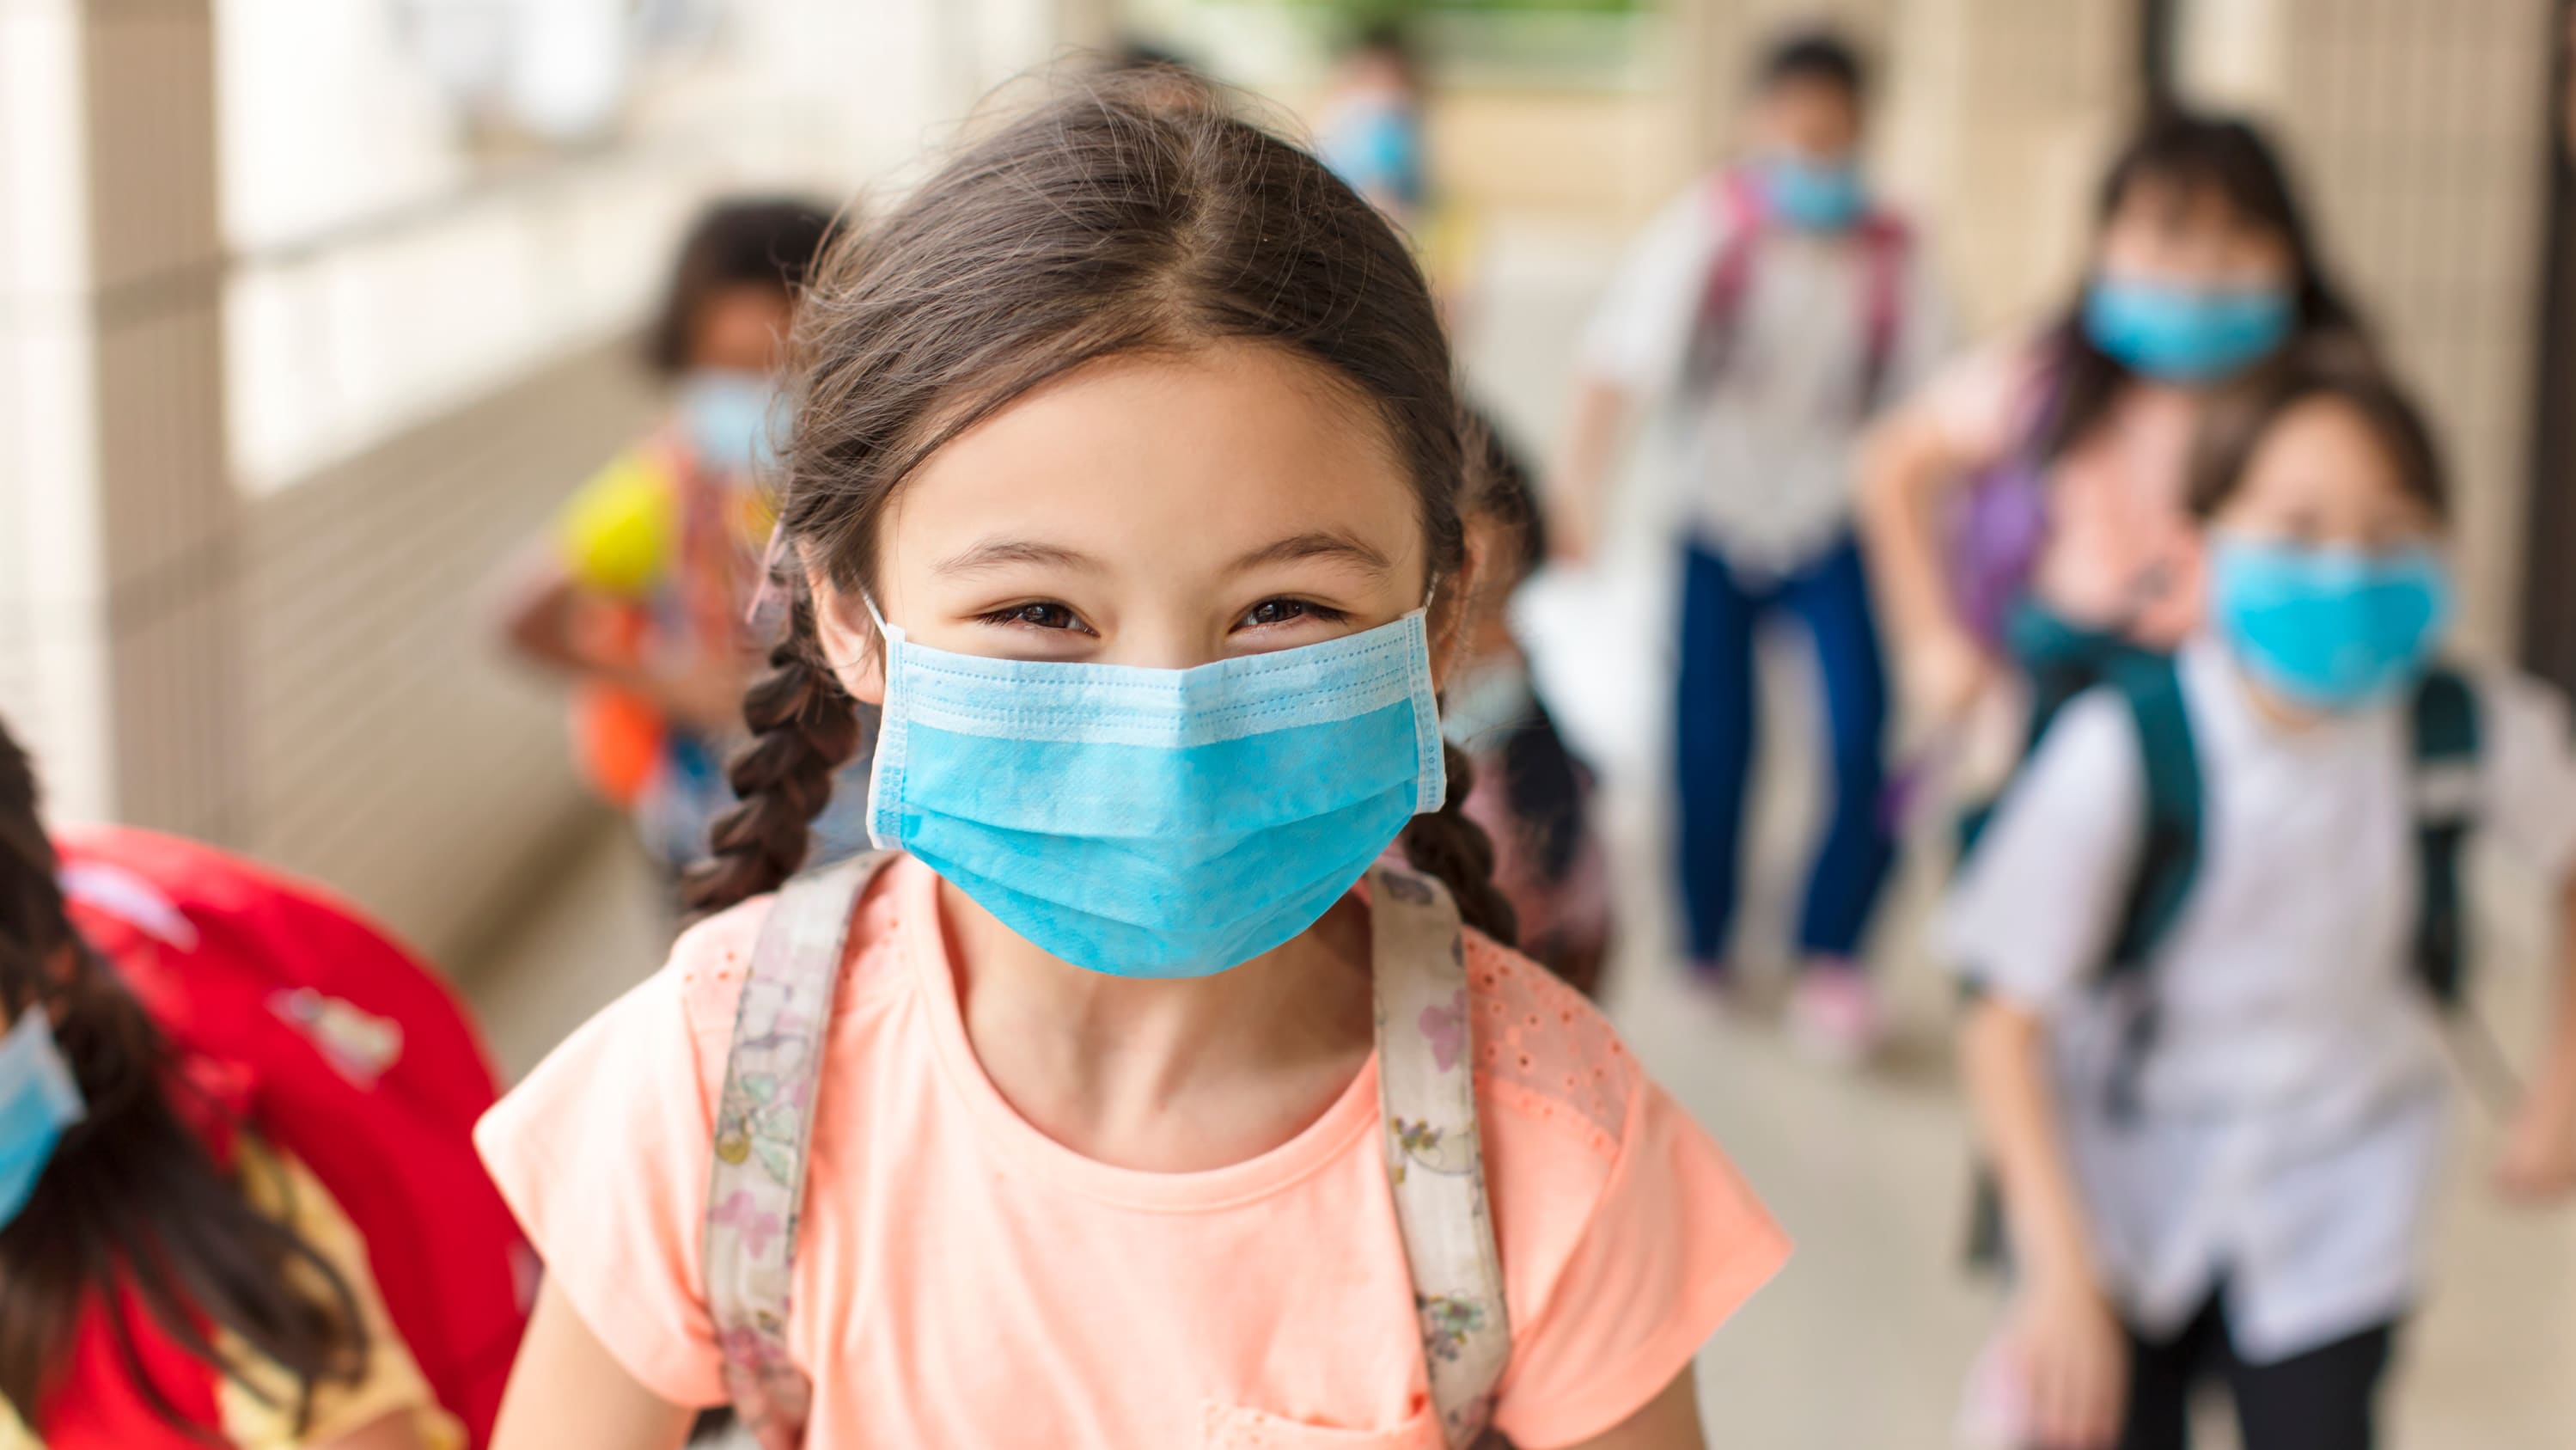 child in mask at school, protecting herself from COVID-19